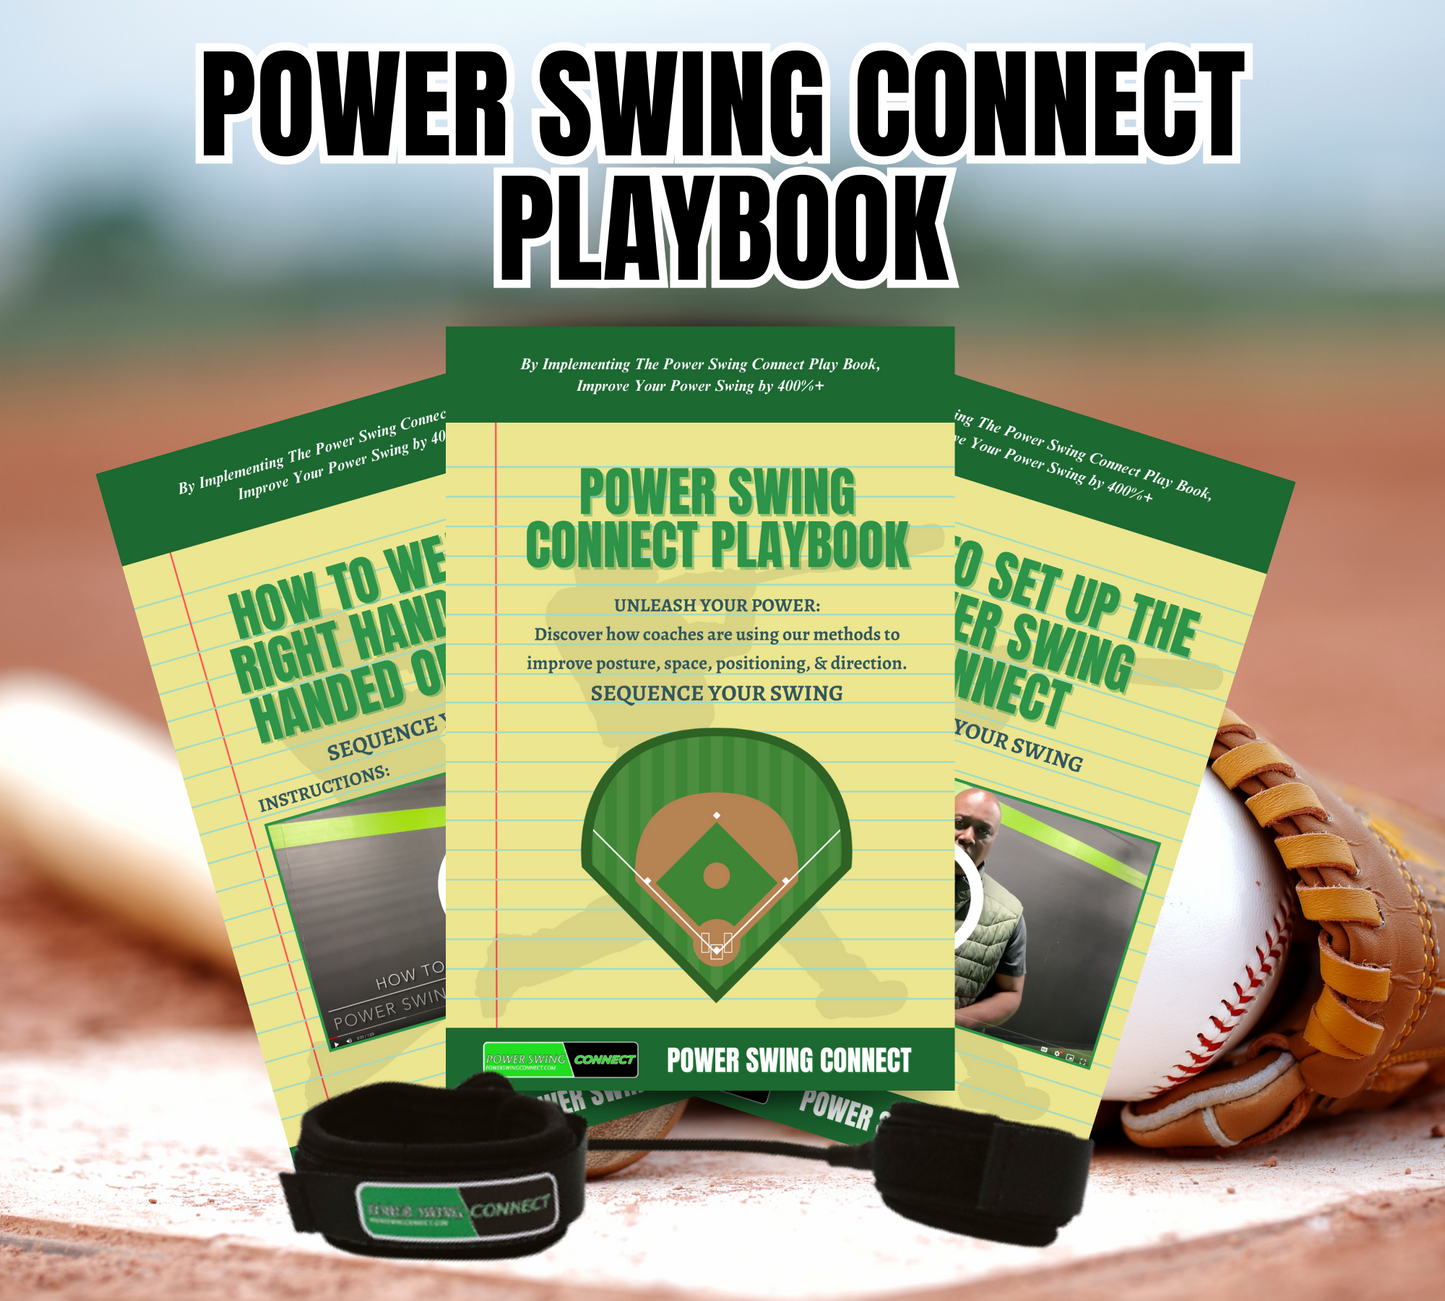 POWER SWING CONNECT + Playbook (2 Pack) (2 Slim)